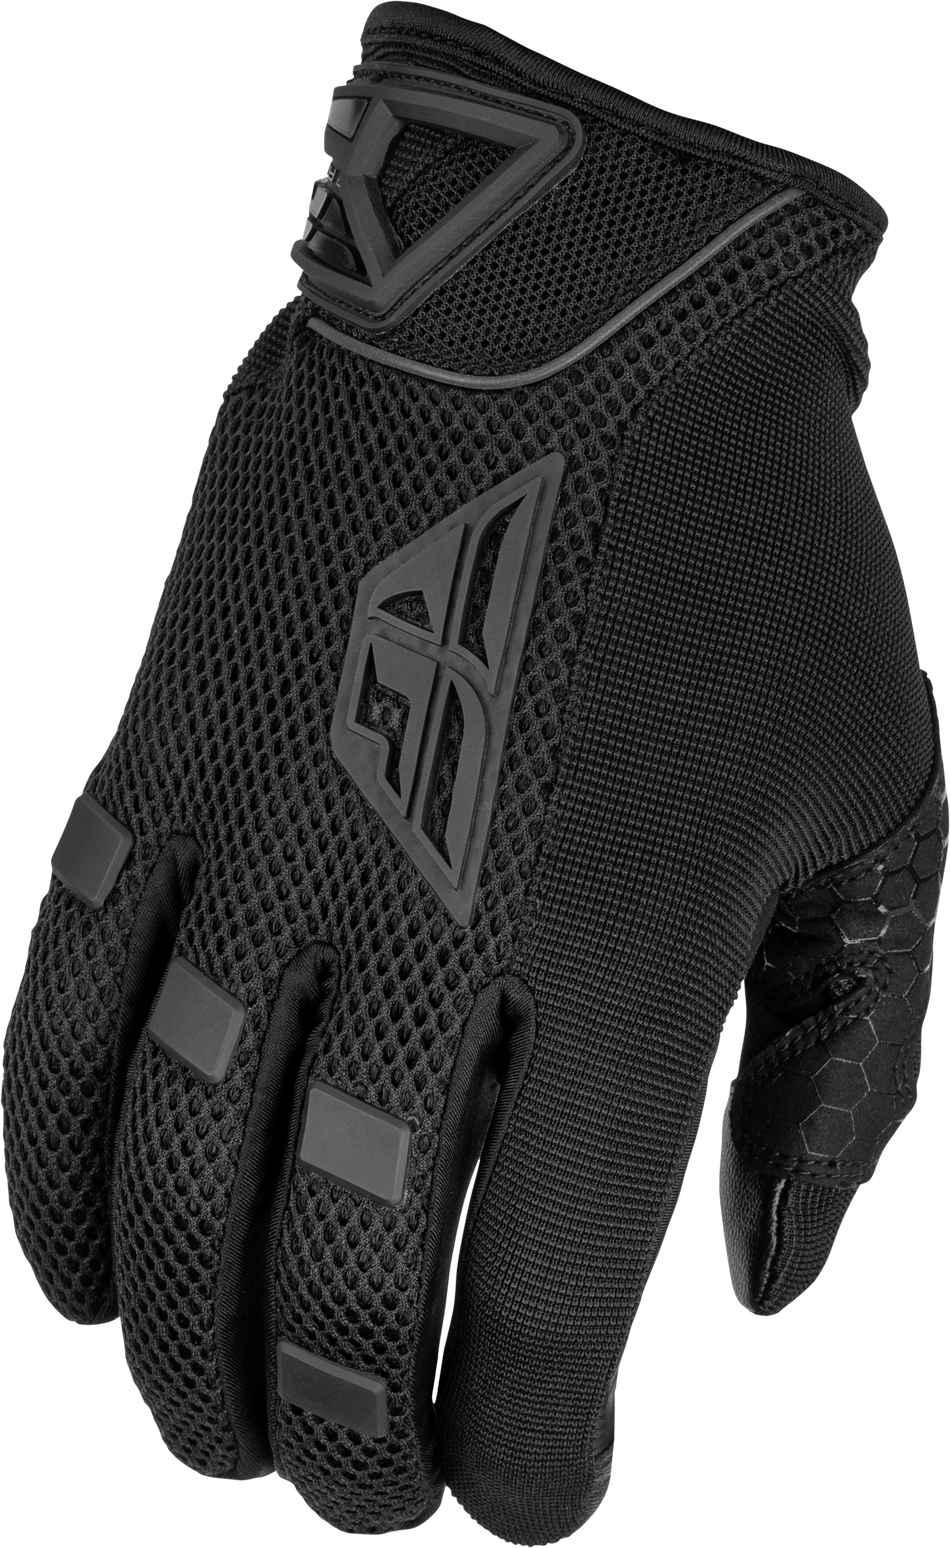 FLY RACING Coolpro Gloves Black Sm 476-4024S